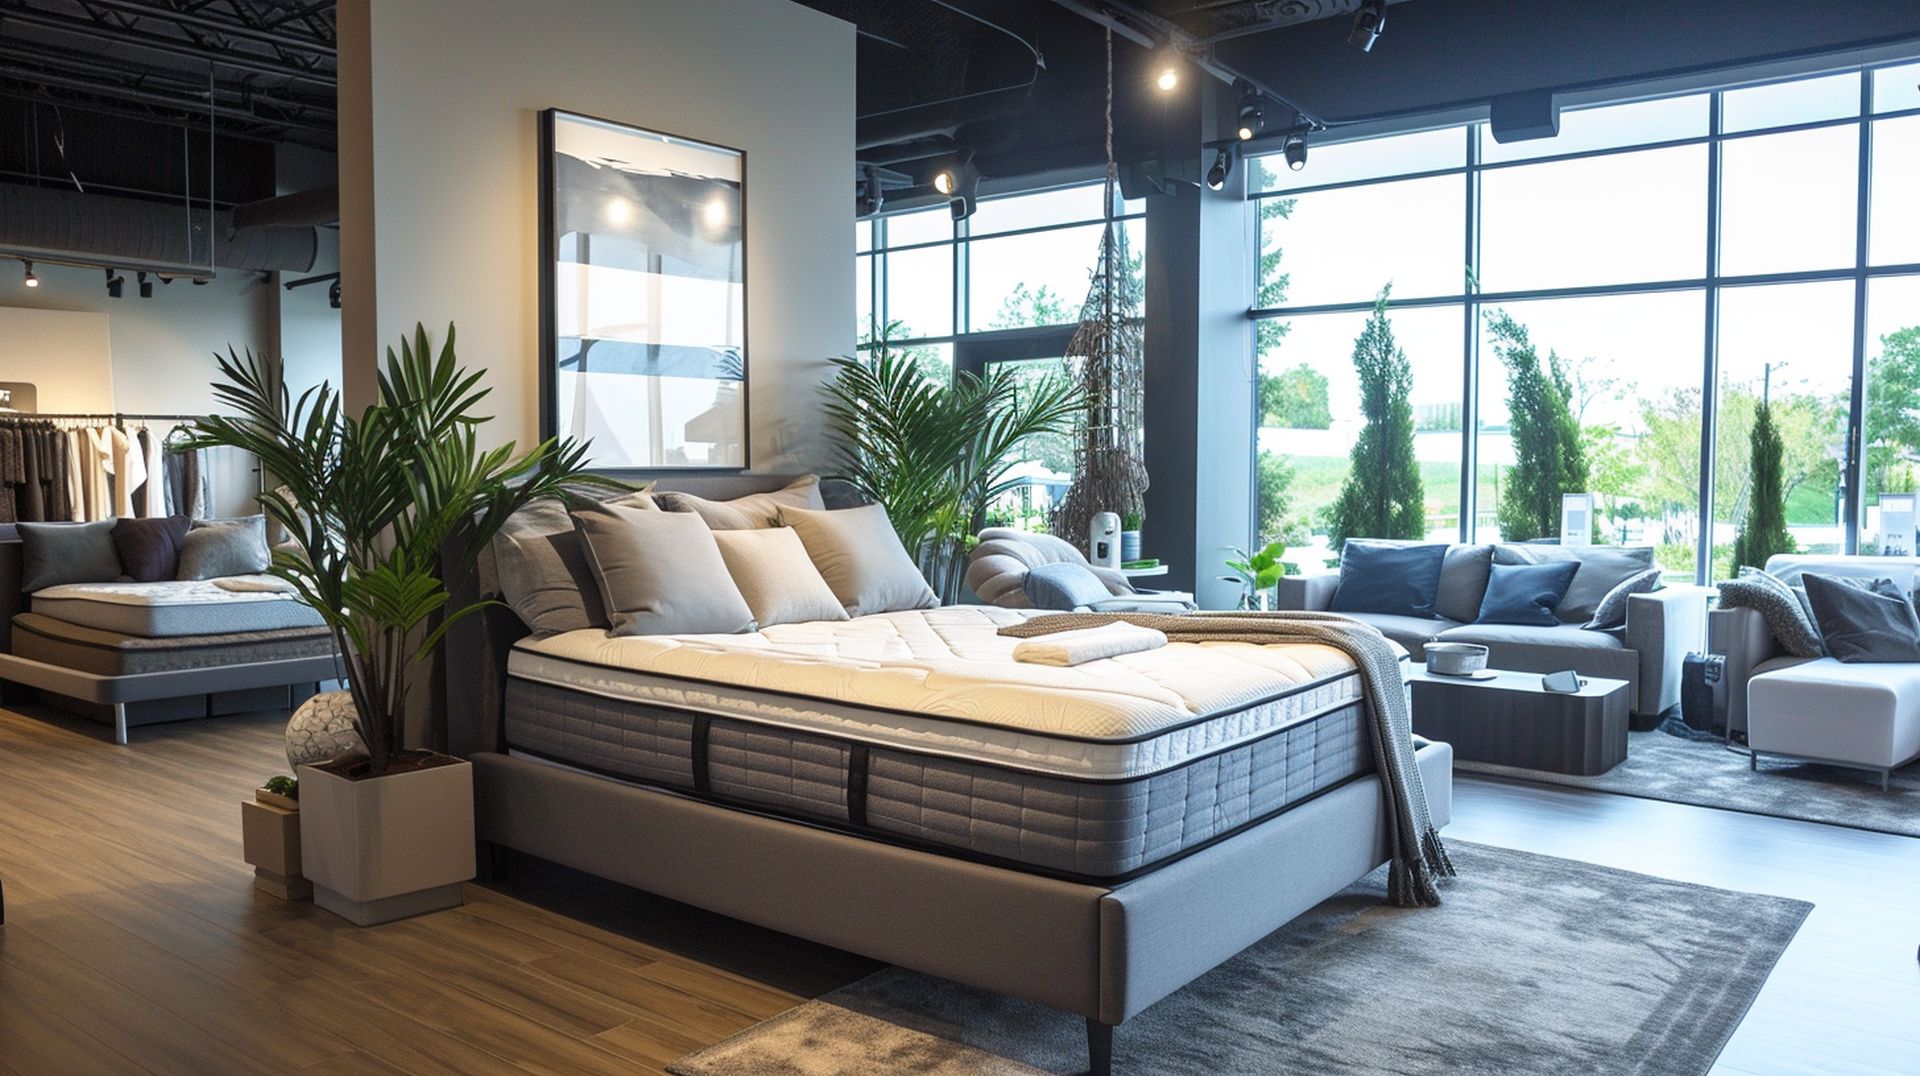 If you're looking for a new bed, mattress stores in Bellingham offer the best customer and delivery service, financing, and warranties in Washington